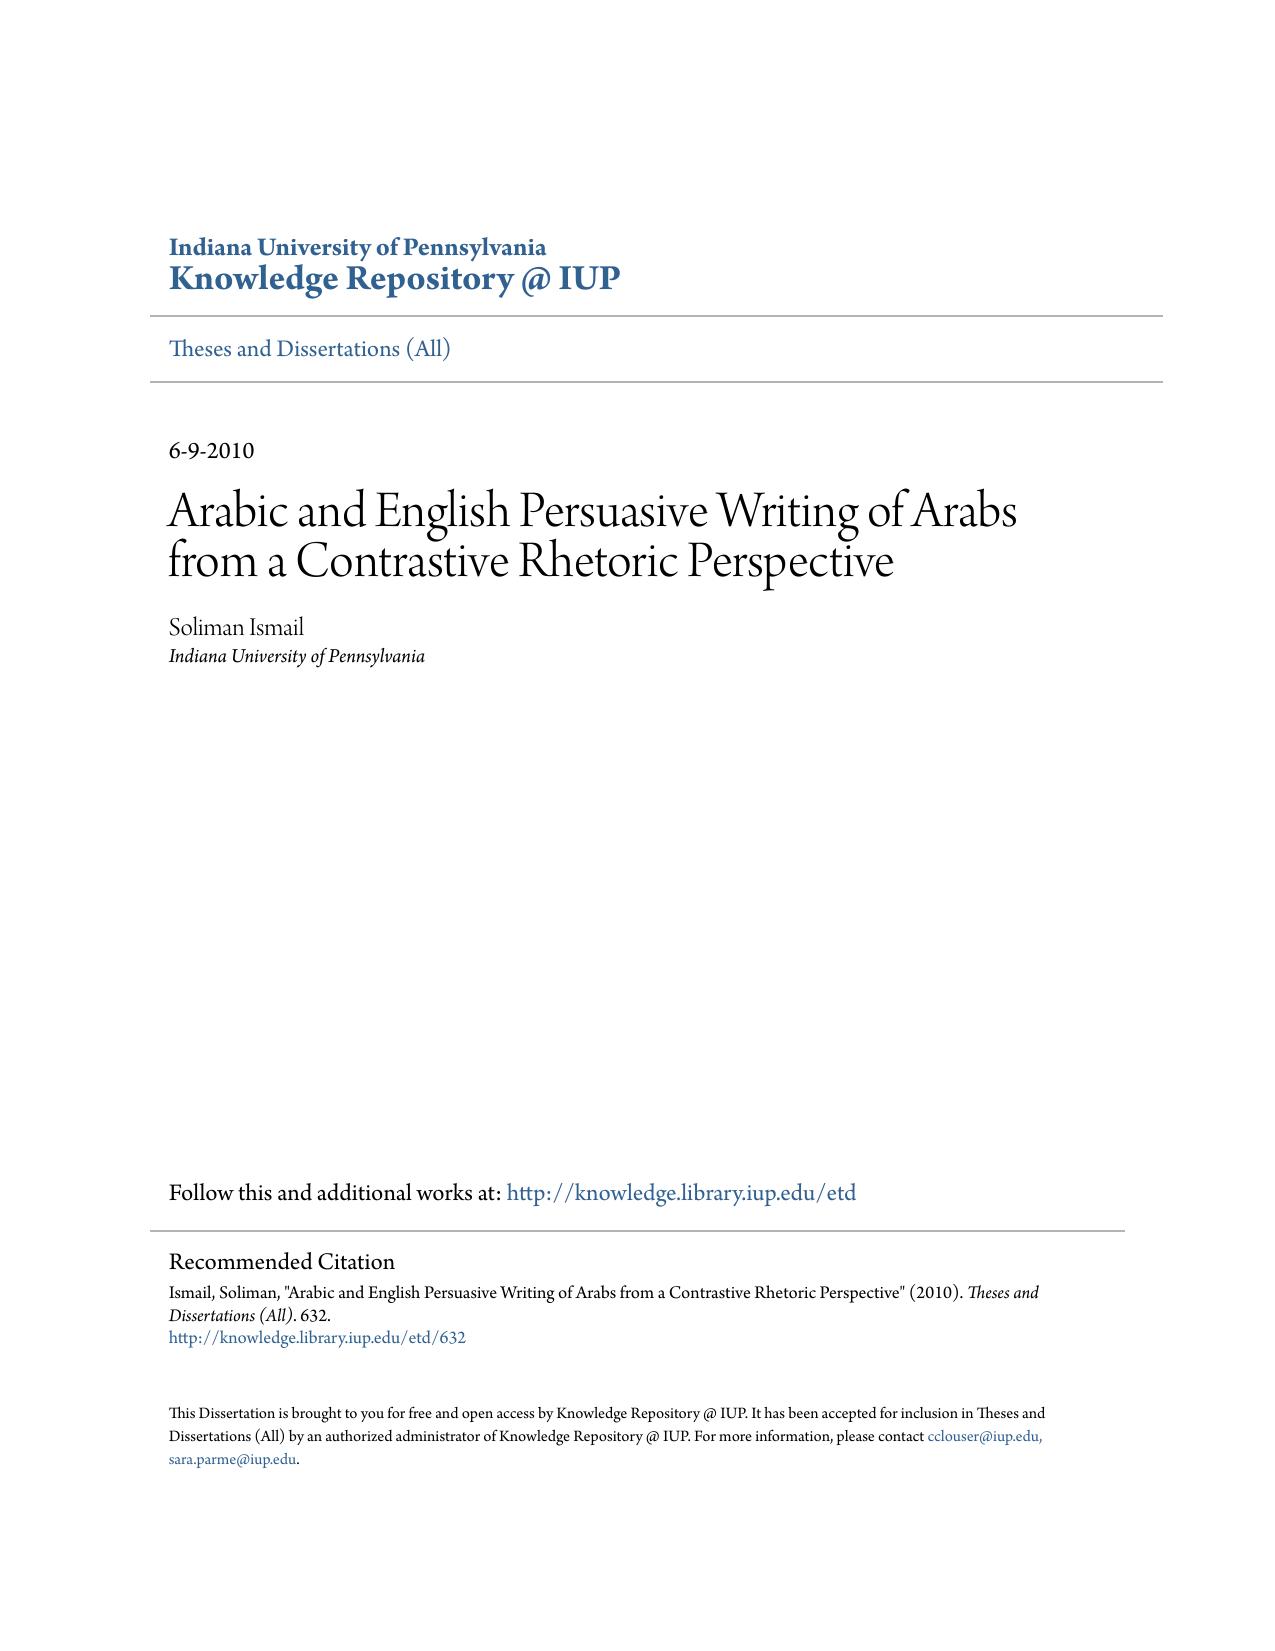 Arabic and English Persuasive Writing of Arabs from a Contrastive Rhetoric Perspective